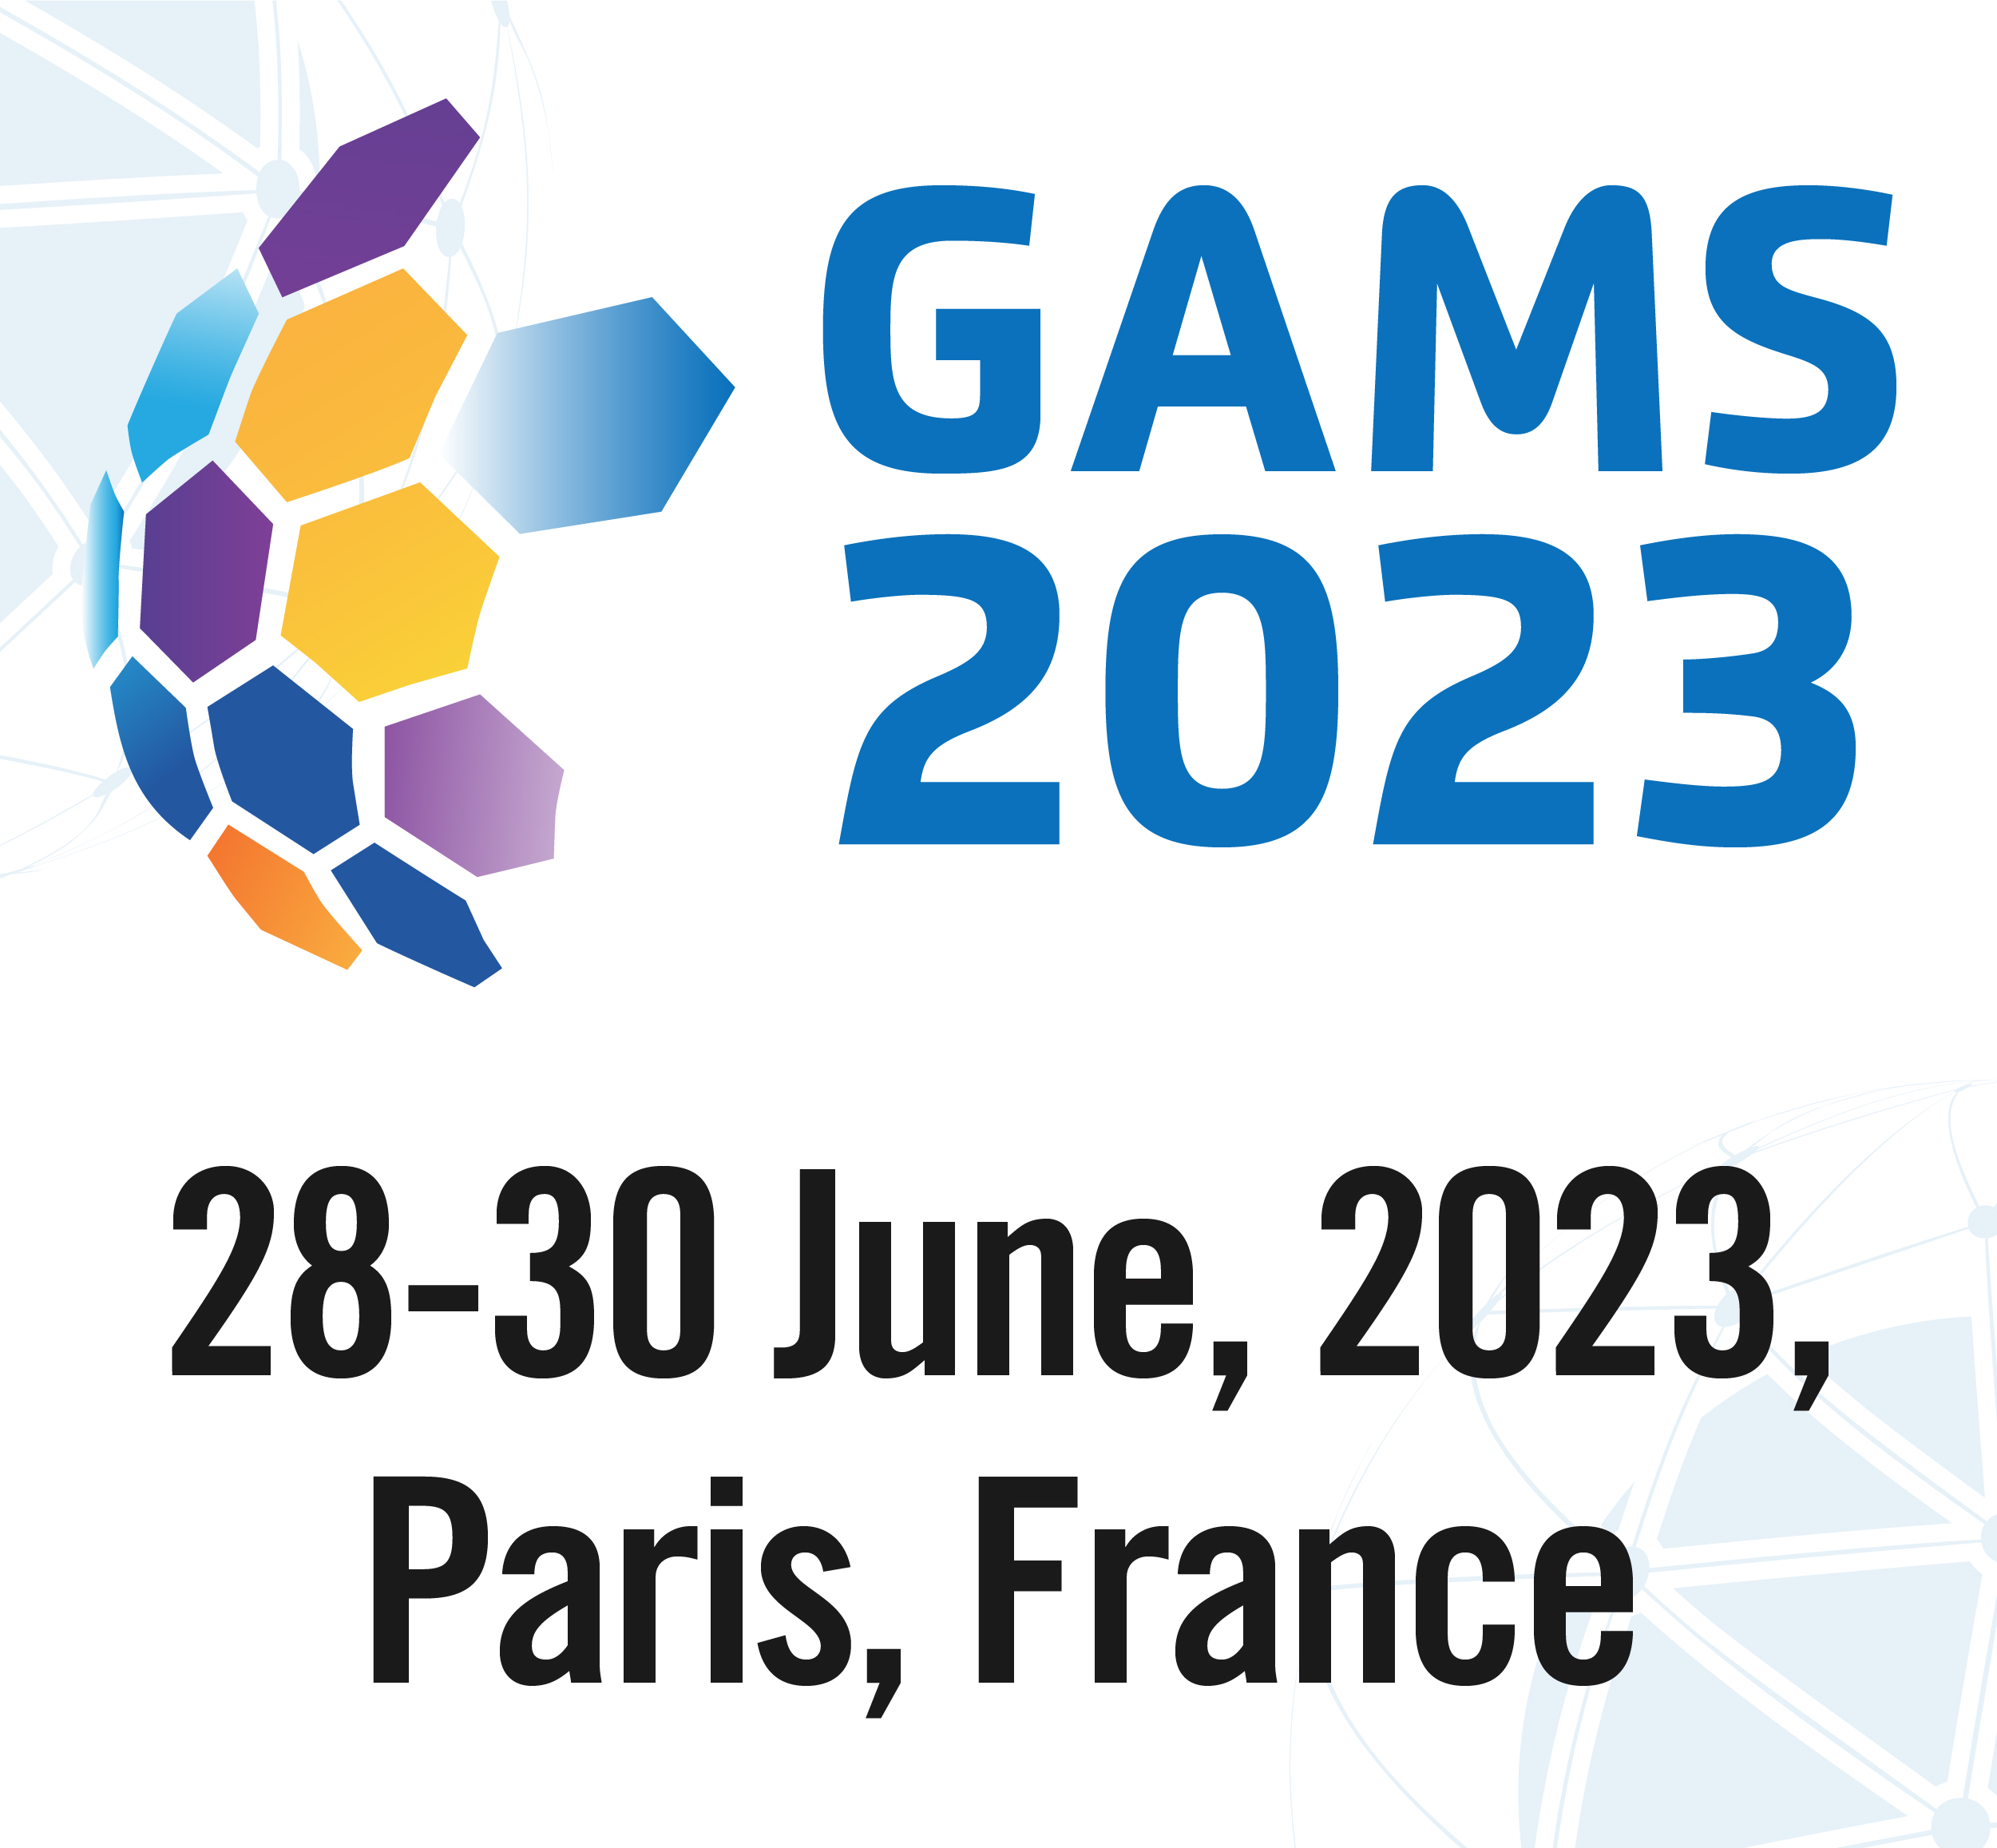 The Global Advanced Materials & Surfaces International Conference - GAMS 2023